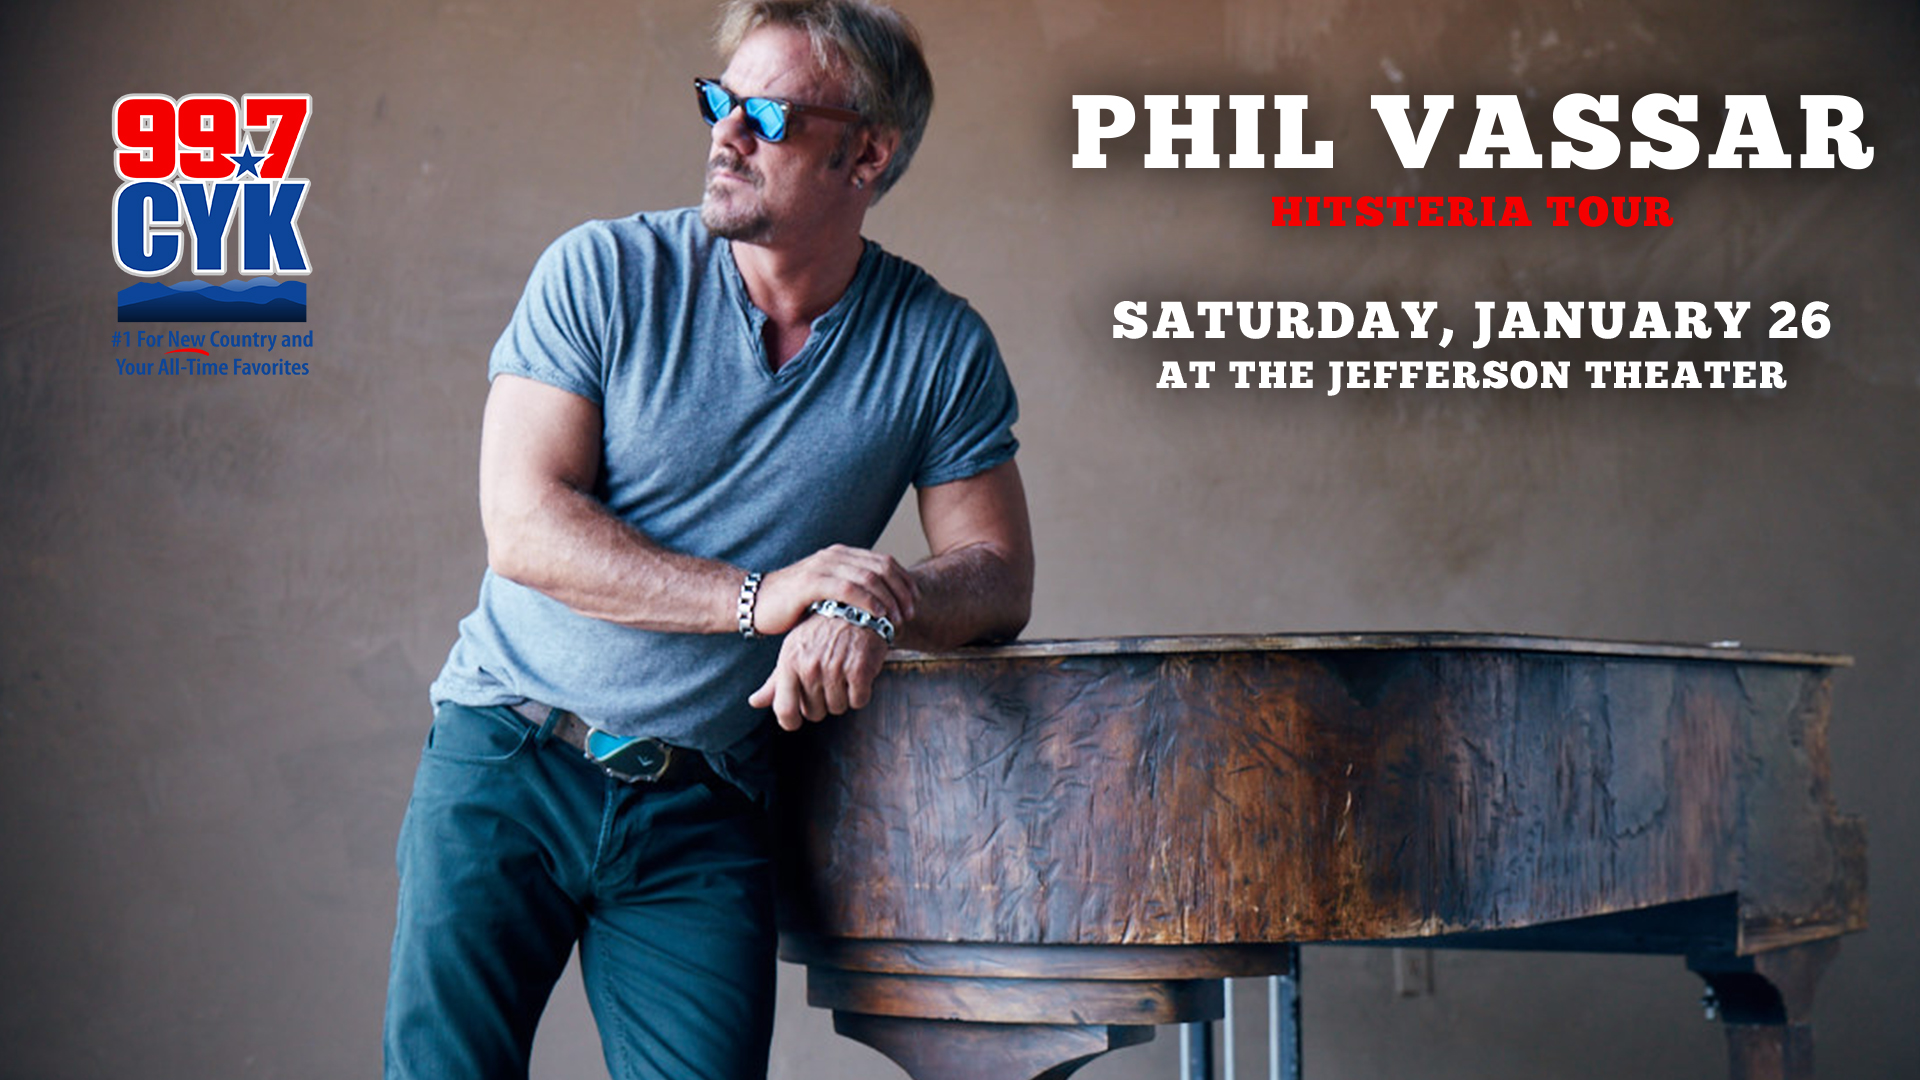 PHIL VASSAR HITSTERIA TOUR PRESENTED BY 99.7 CYK 99.7 CYK 1 for